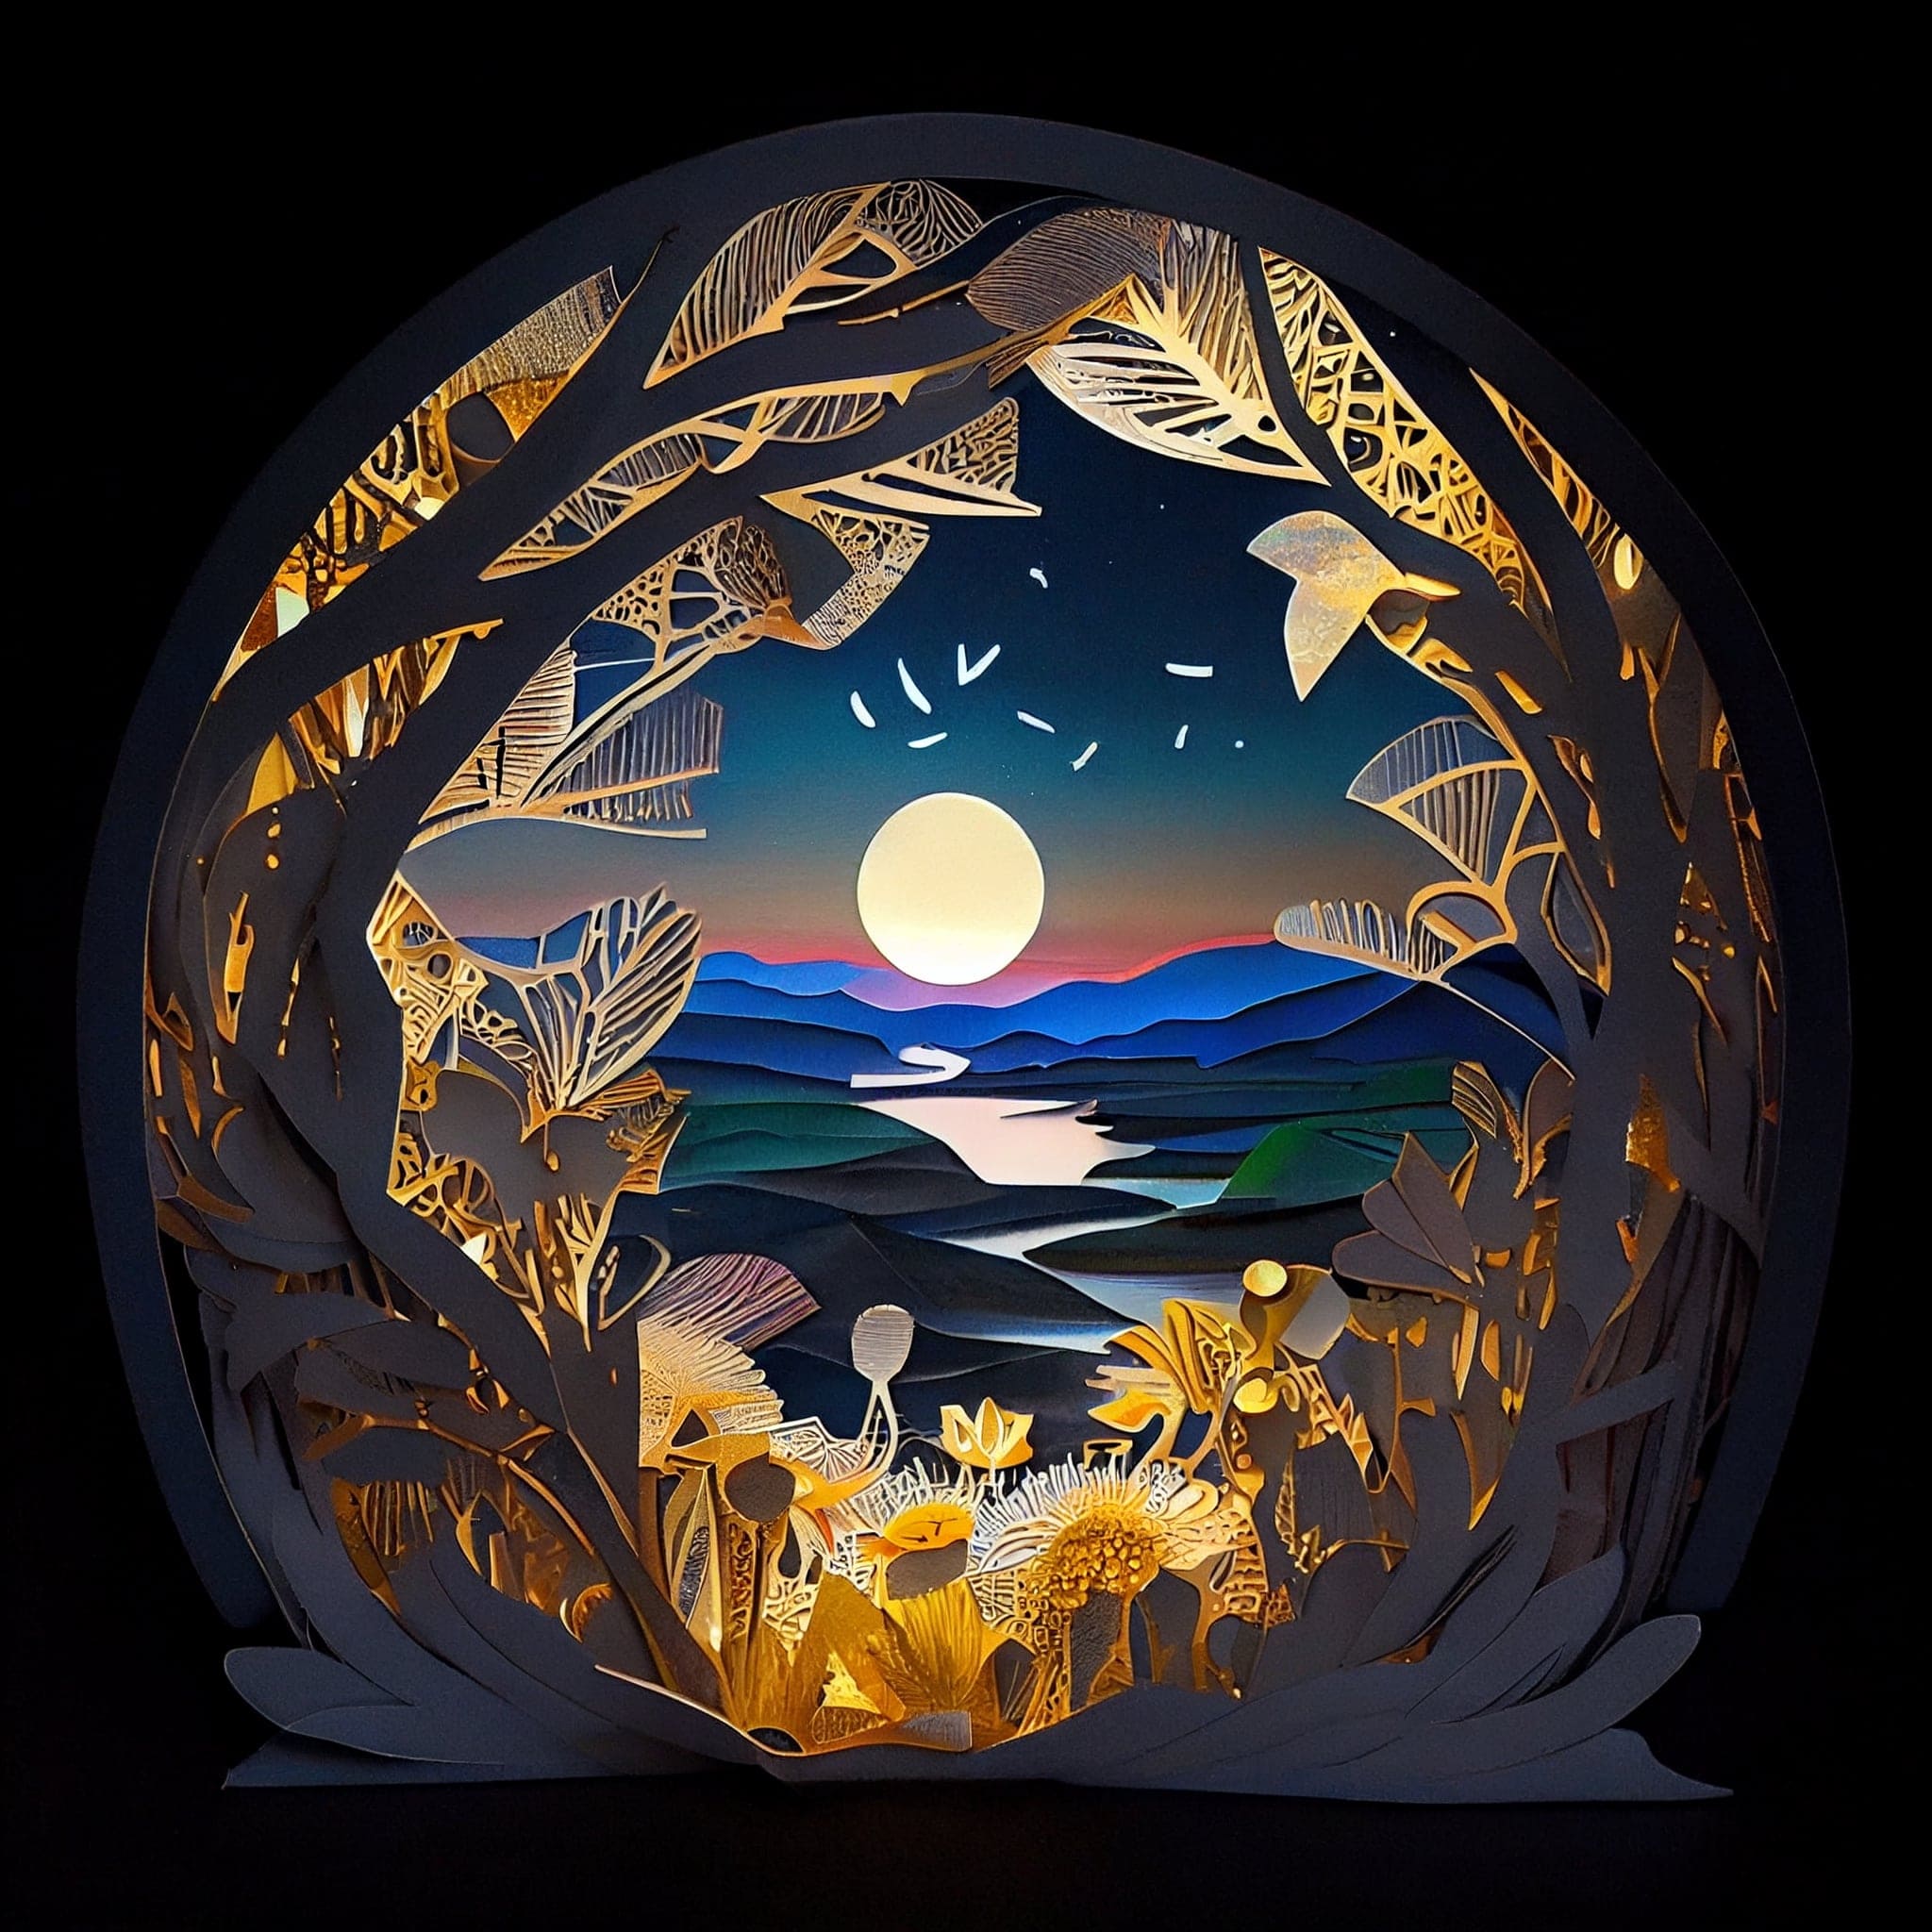 Paper cut out of a landscape with a full moon.